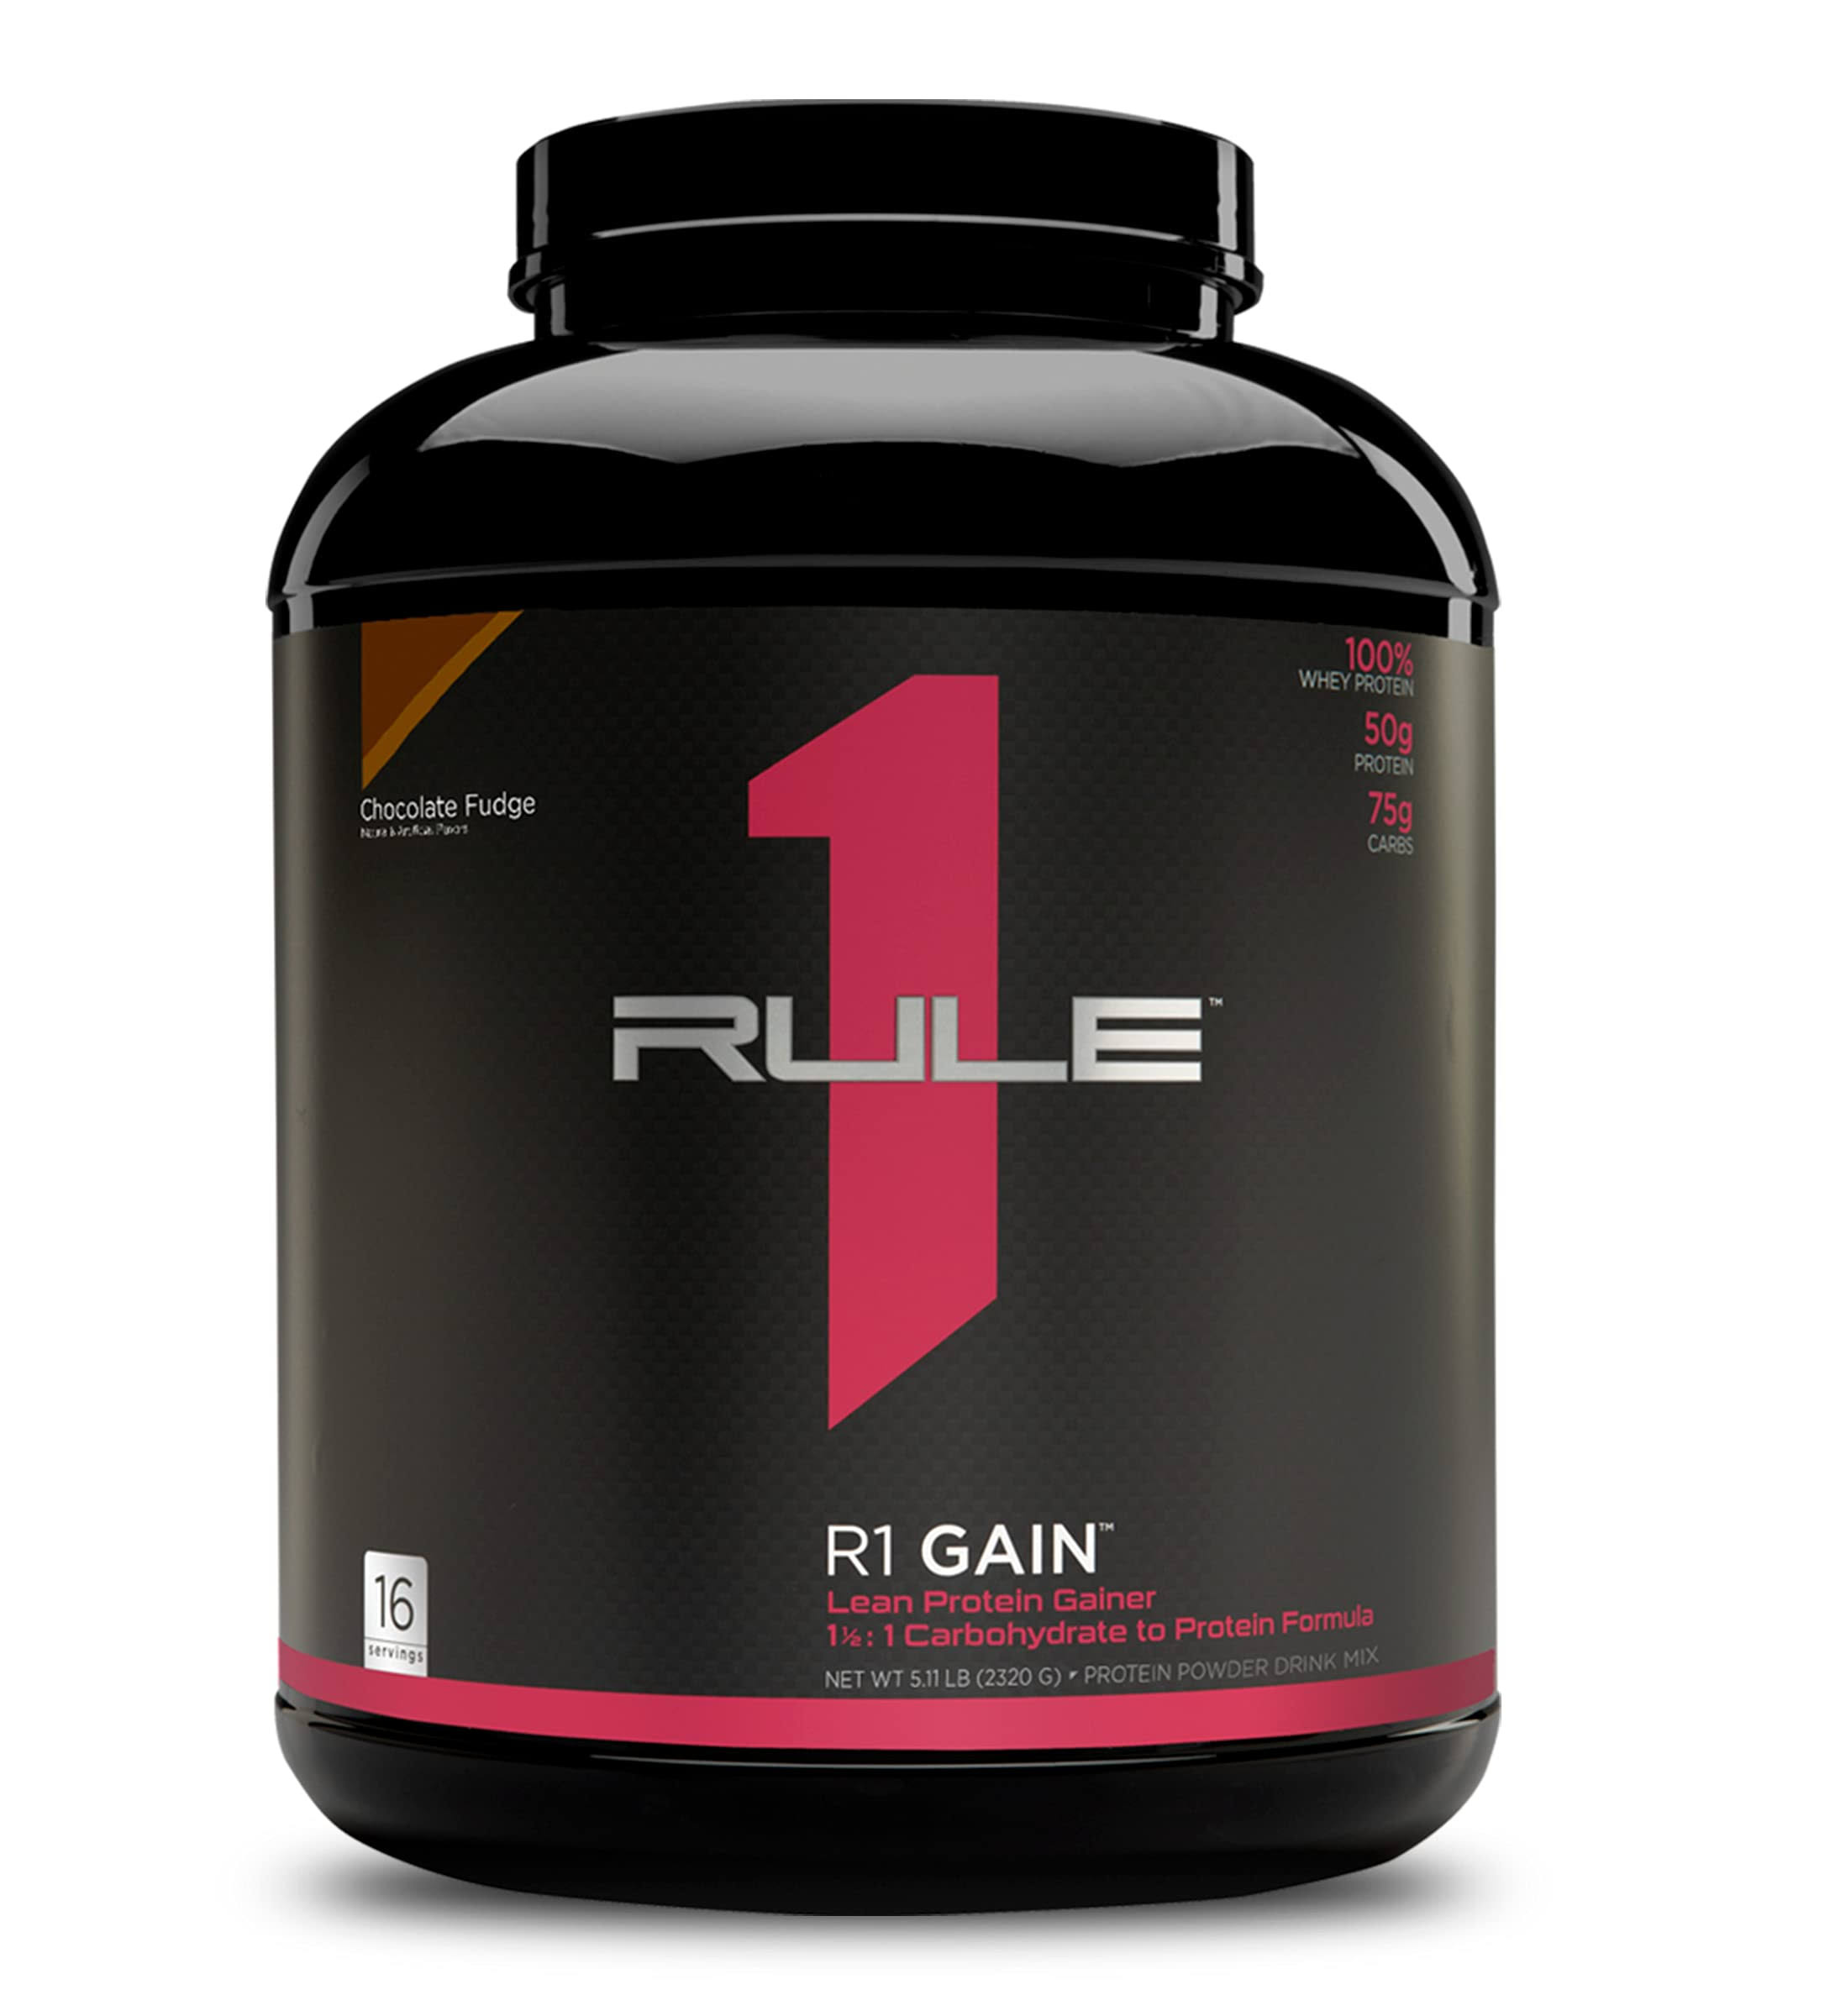 Rule 1 Whey Protein Isolate Gainer - R1 Gain, Chocolate Fudge, 16 Servings